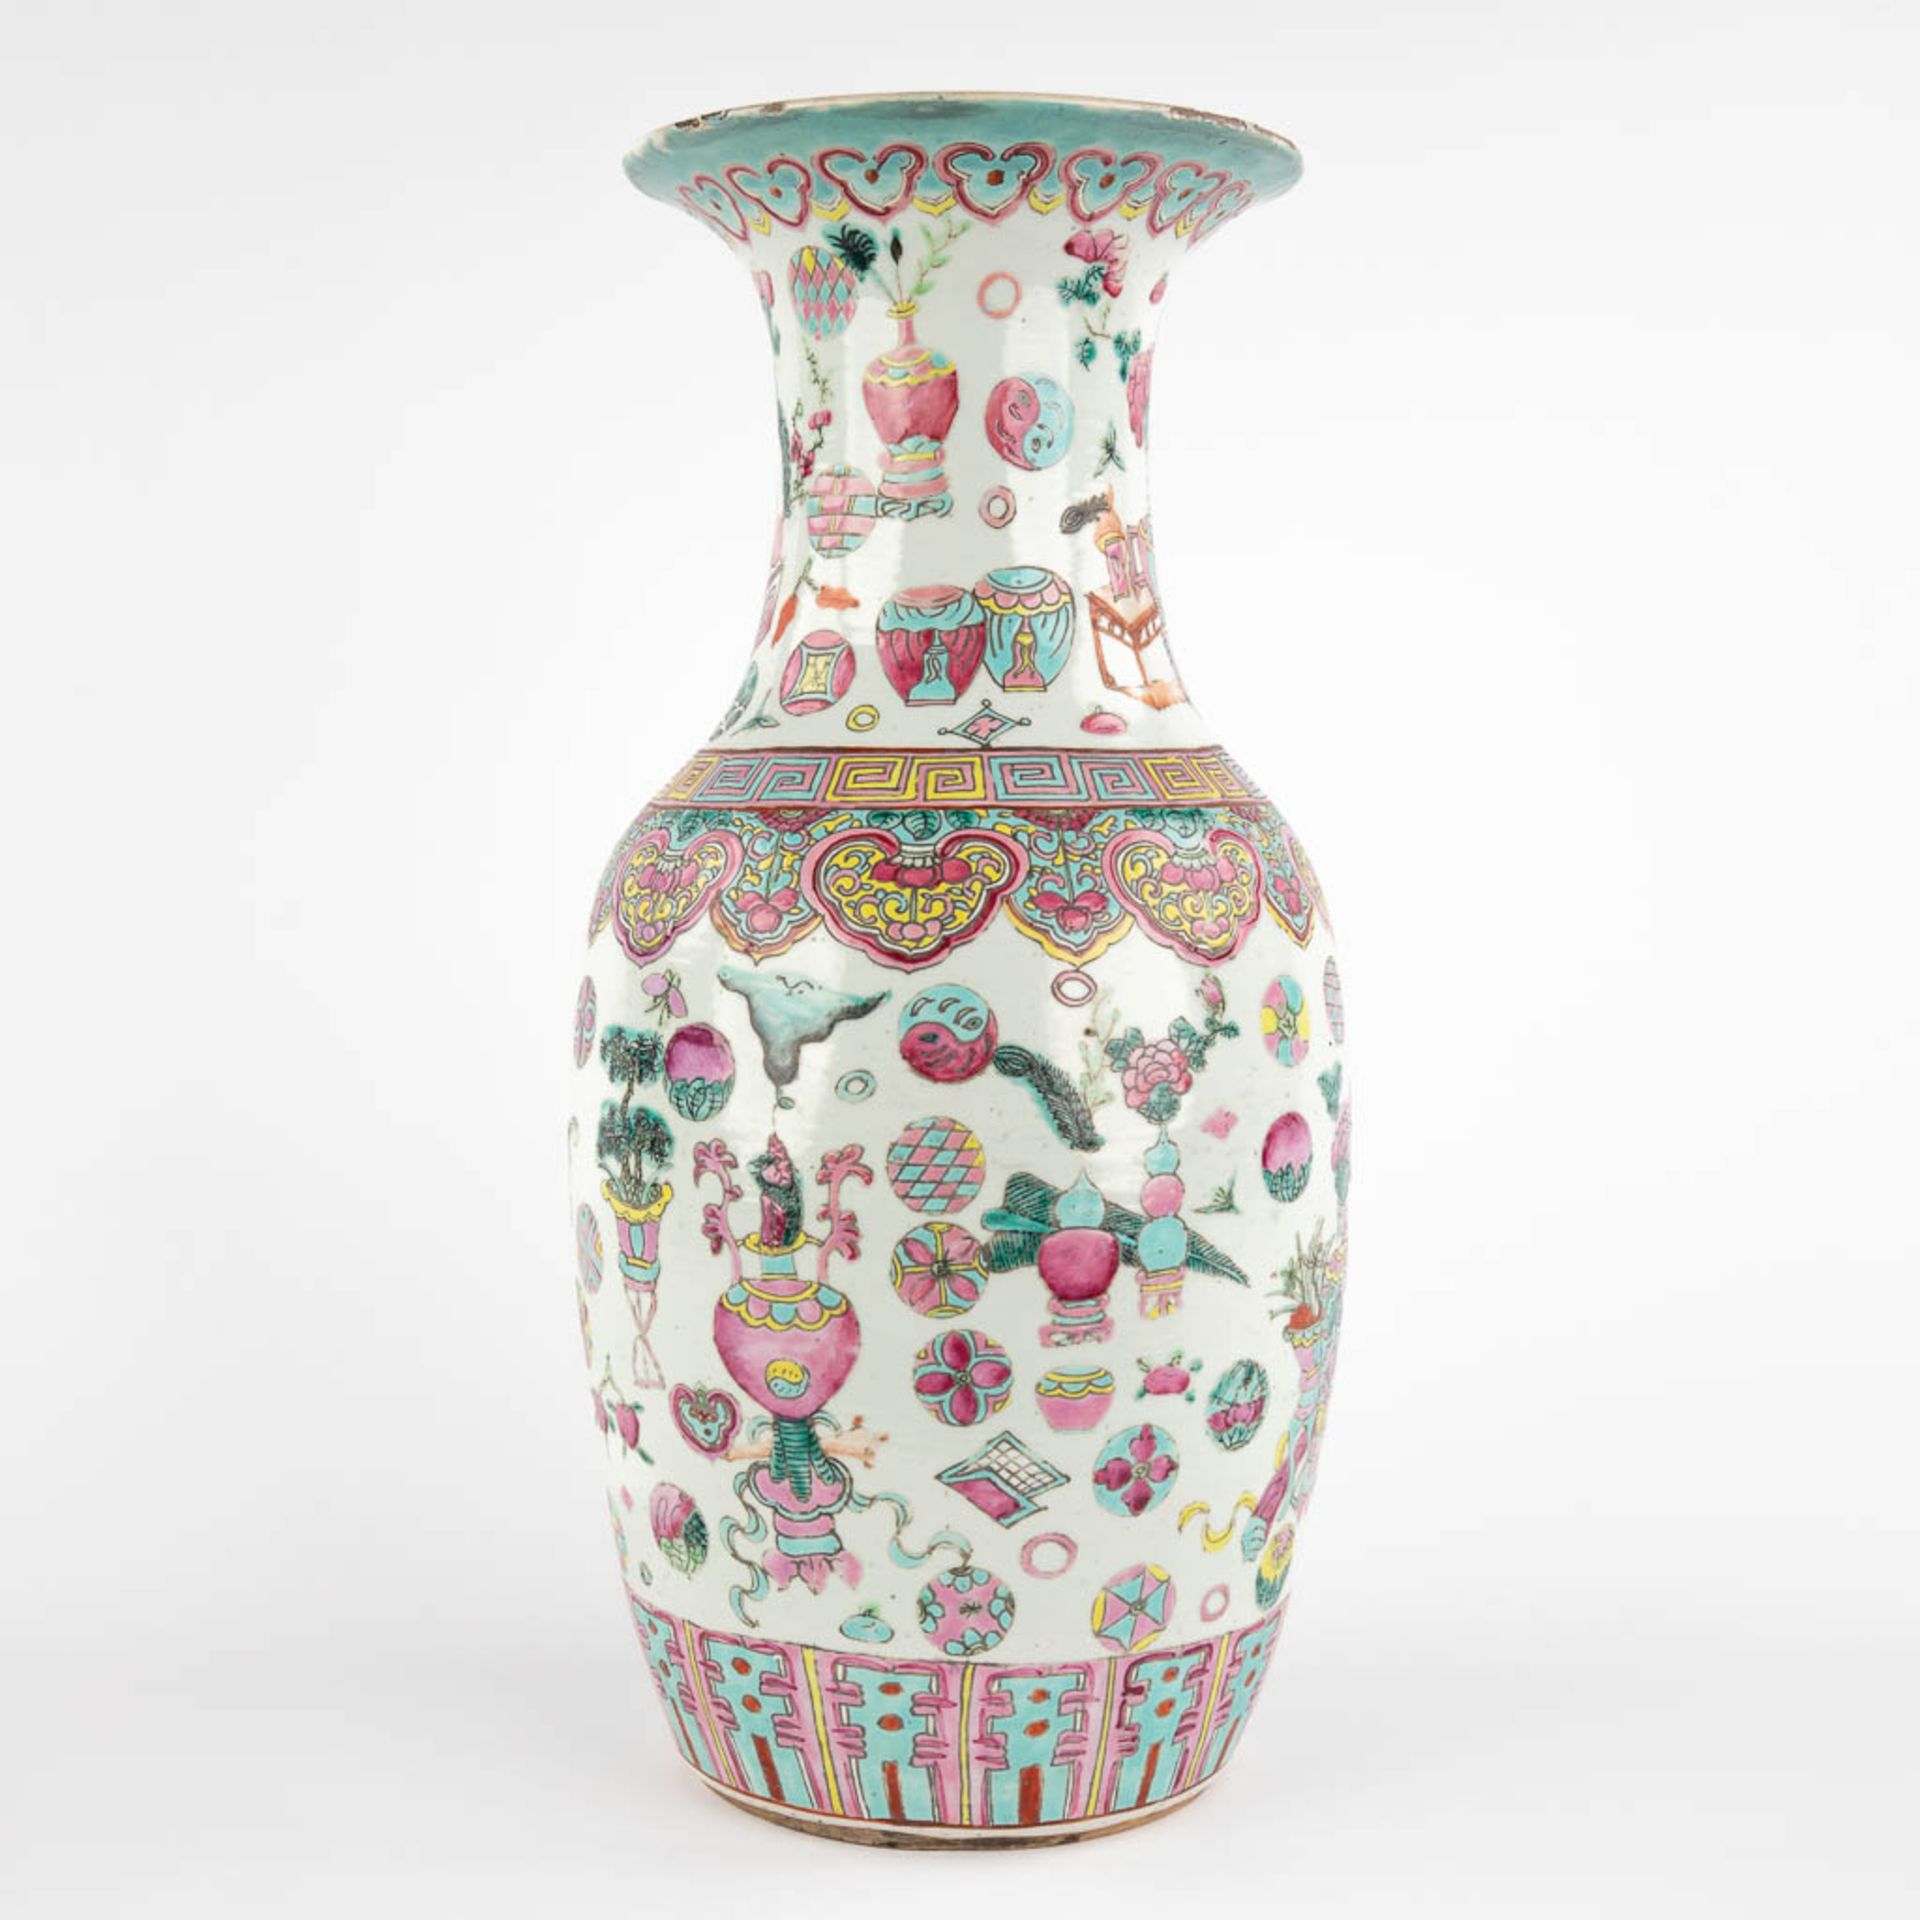 A Chinese vase with a decor of antiquities. 19th/20th C. (H:44 x D:21 cm) - Image 5 of 11